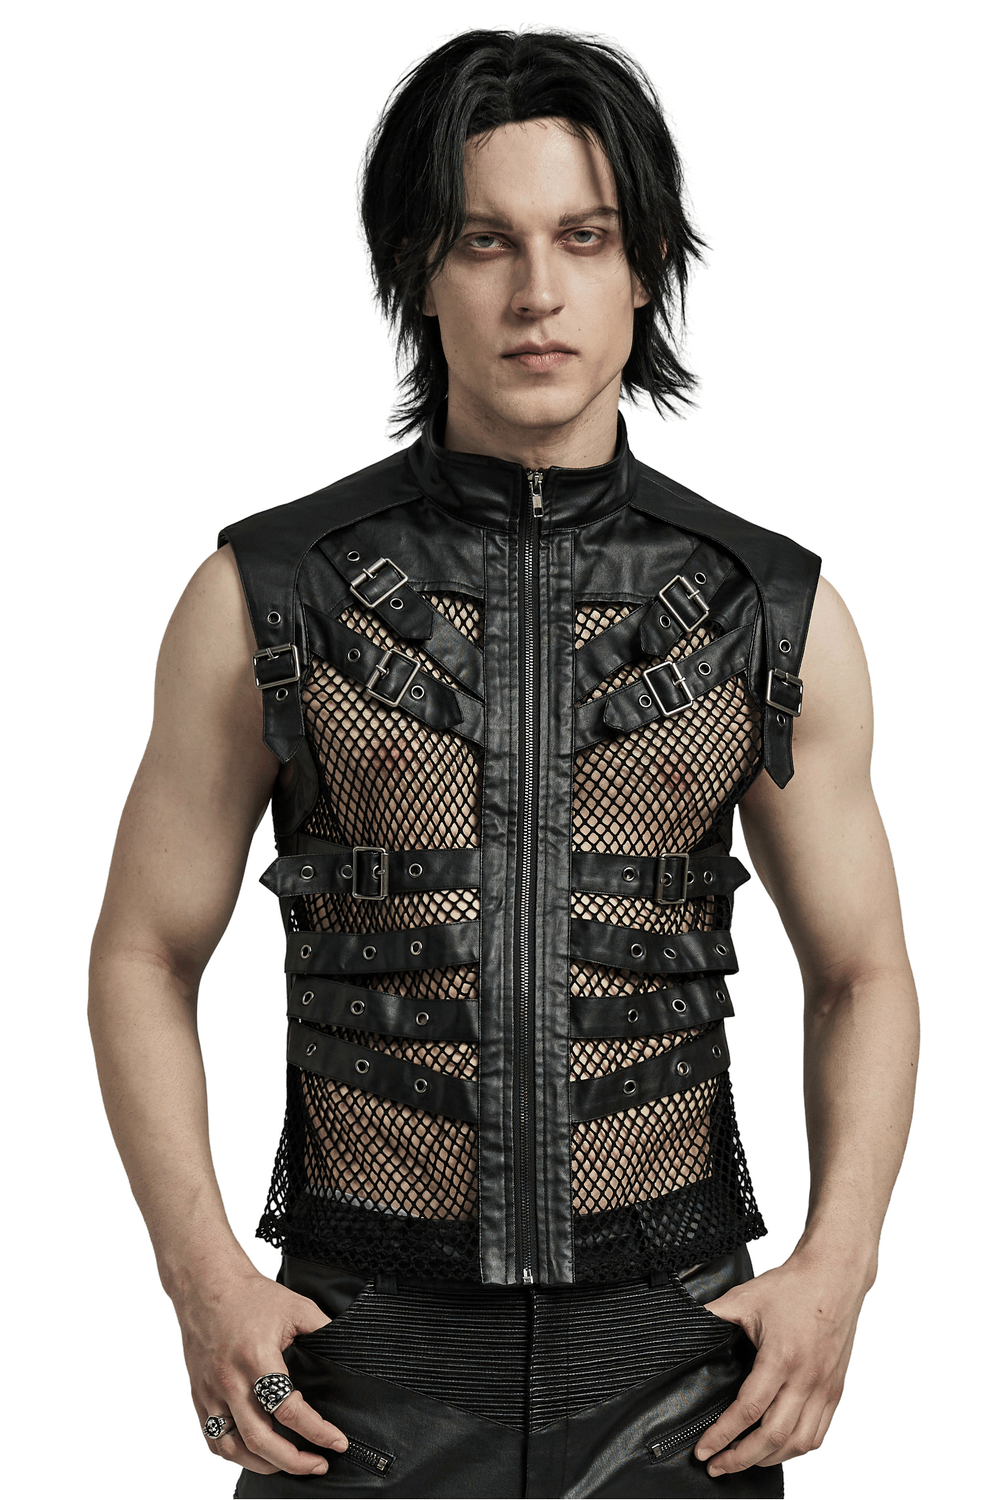 Edgy Zippered Black Punk Leather Vest With Mesh Back